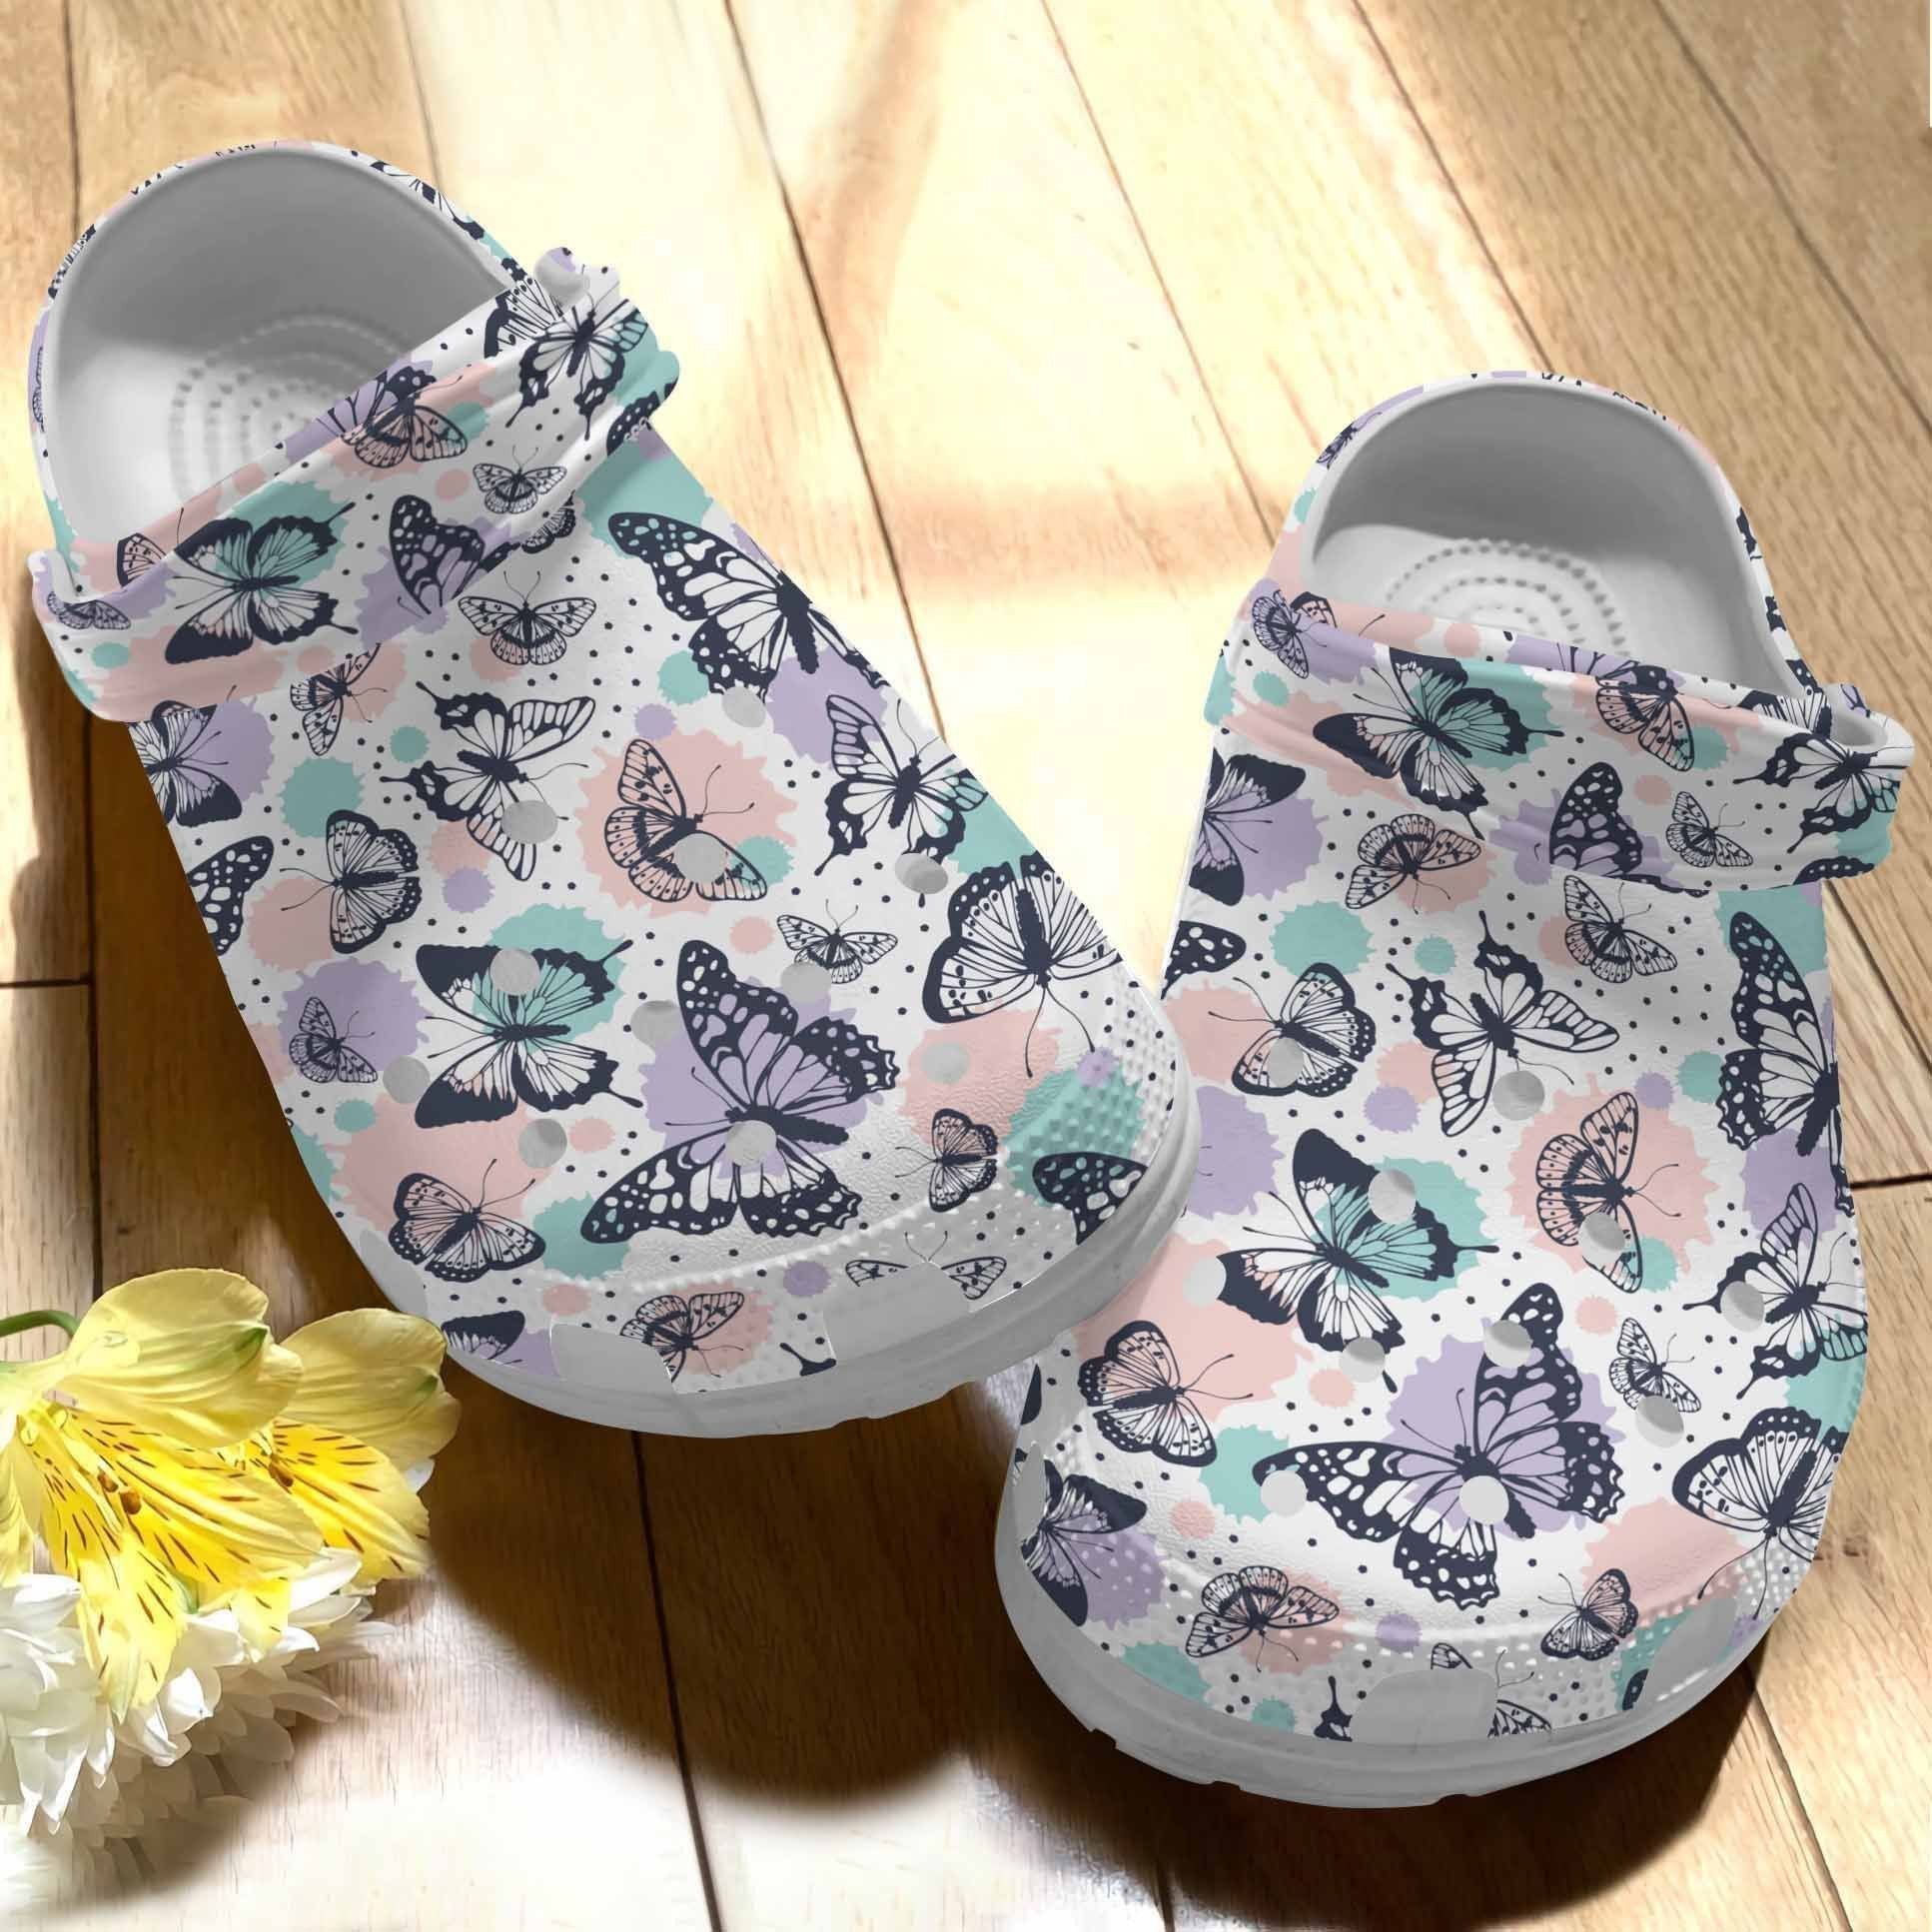 Picnic Butterflies Croc Shoes For Women - Butterfly Art Shoes Crocbland Clog Birthday Gifts For Daughter Niece